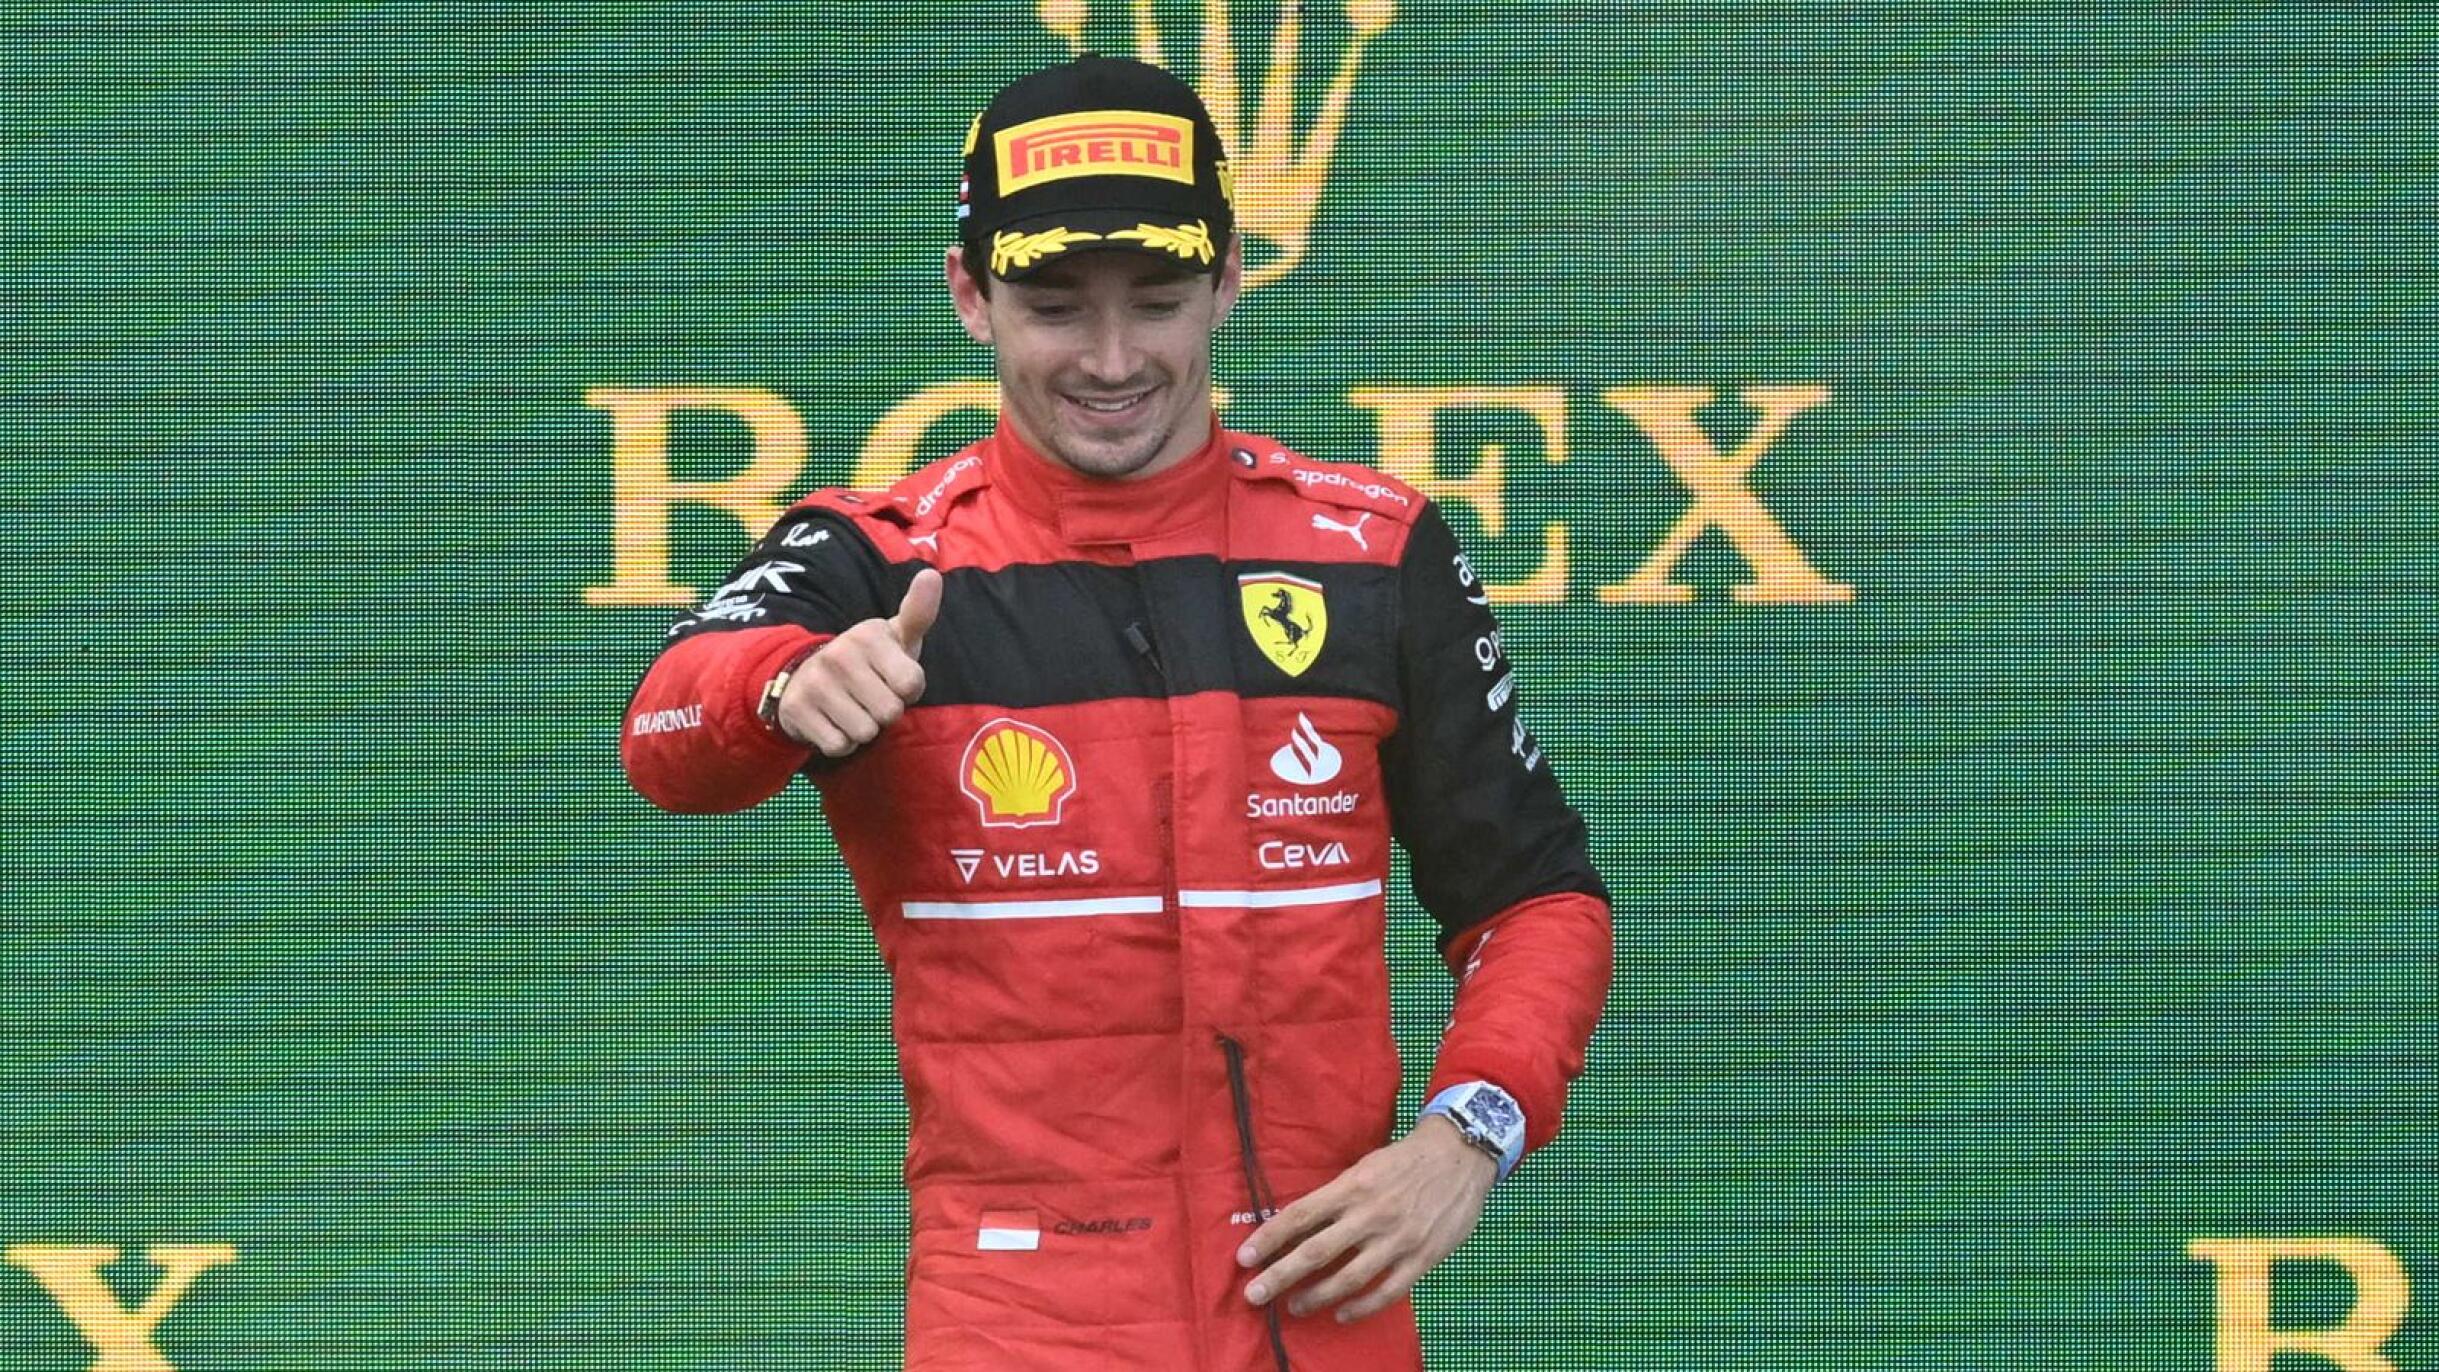 Ferrari's Monegasque driver Charles Leclerc celebrates on the podium after winning the Formula One Austrian Grand Prix at the Red Bull Ring race track in Spielberg, Austria, on Sunday